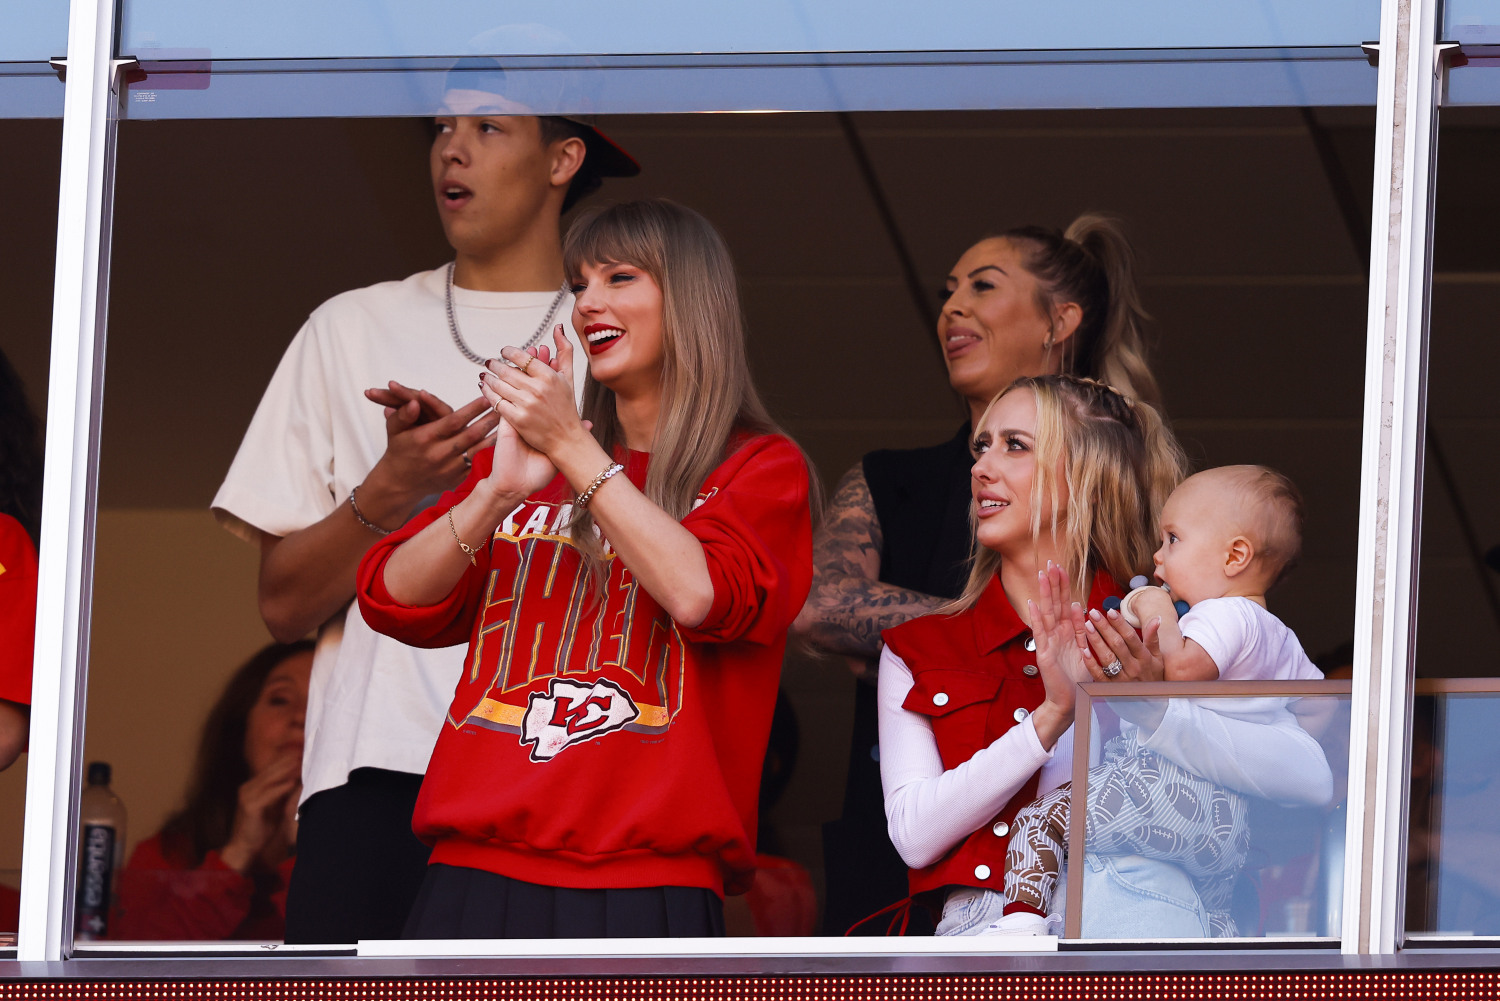 Taylor Swift And Jackson Mahomes At Chiefs vs Chargers, Video